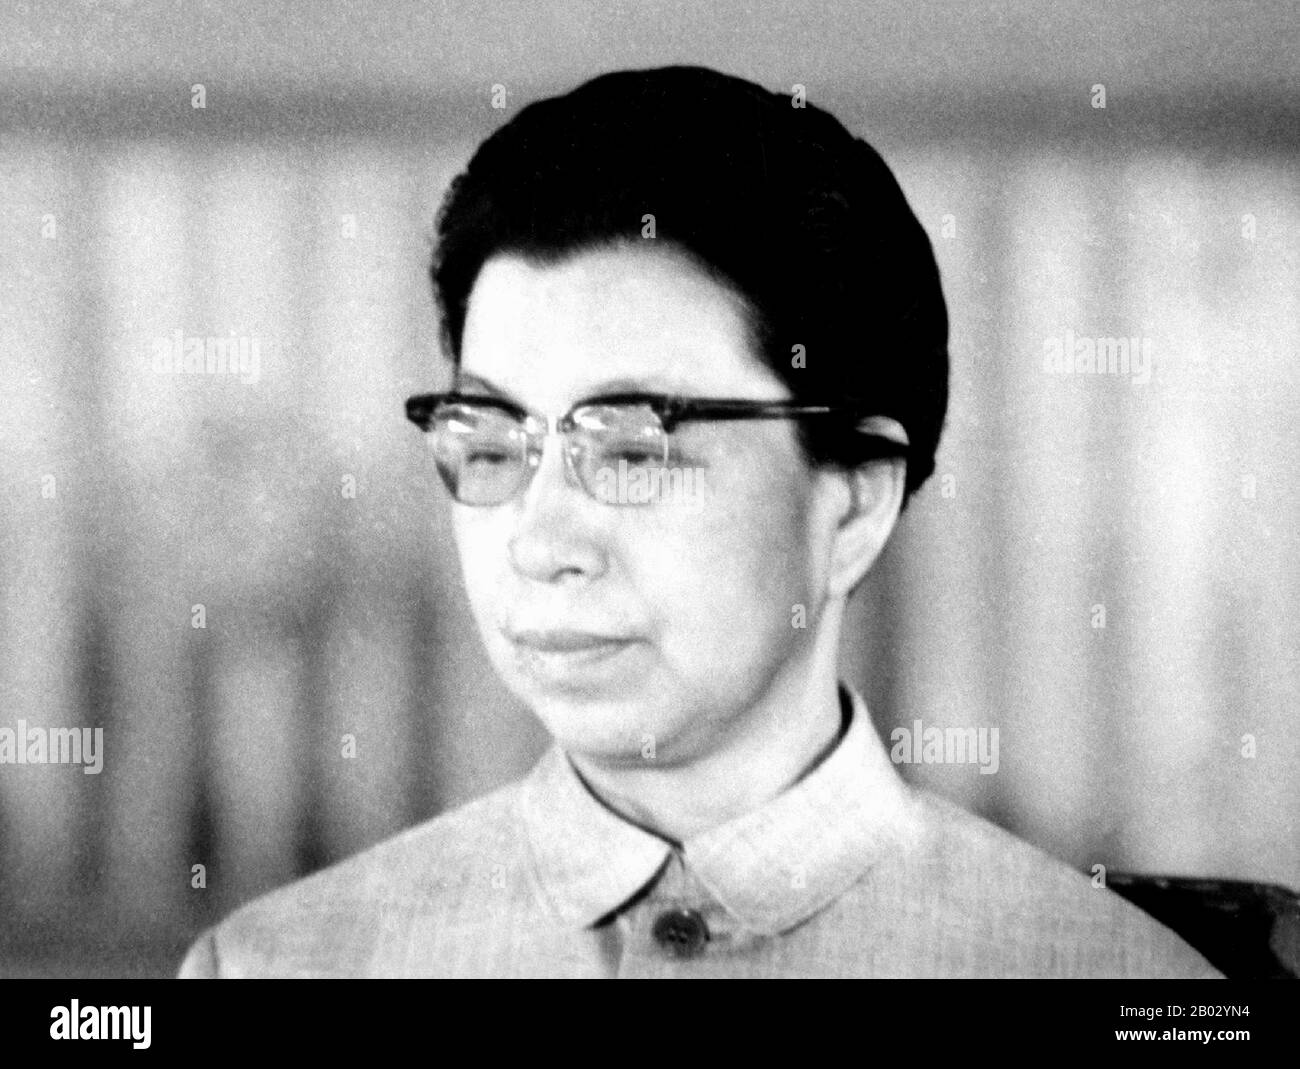 Jiang Qing (Chiang Ch'ing, March 1914 – May 14, 1991) was the pseudonym that was used by Chinese leader Mao Zedong's last wife and major Communist Party of China power figure.  She went by the stage name Lan Ping during her acting career, and was known by various other names during her life. She married Mao in Yan'an in November 1938, and is sometimes referred to as Madame Mao in Western literature, serving as Communist China's first first lady.  Jiang Qing was most well-known for playing a major role in the Cultural Revolution (1966–76) and for forming the radical political alliance known as Stock Photo